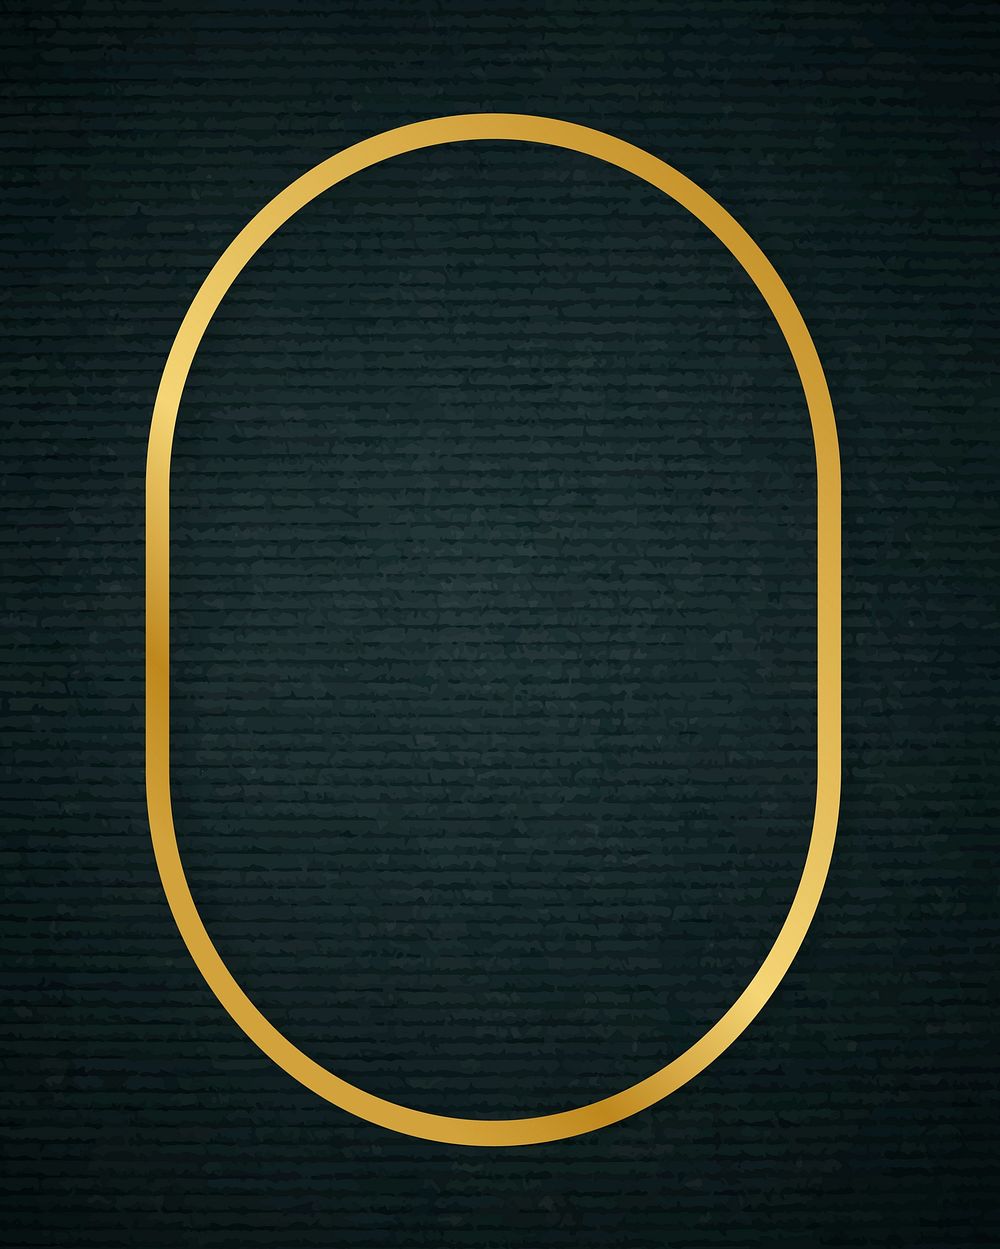 Gold oval frame on a dark fabric textured background